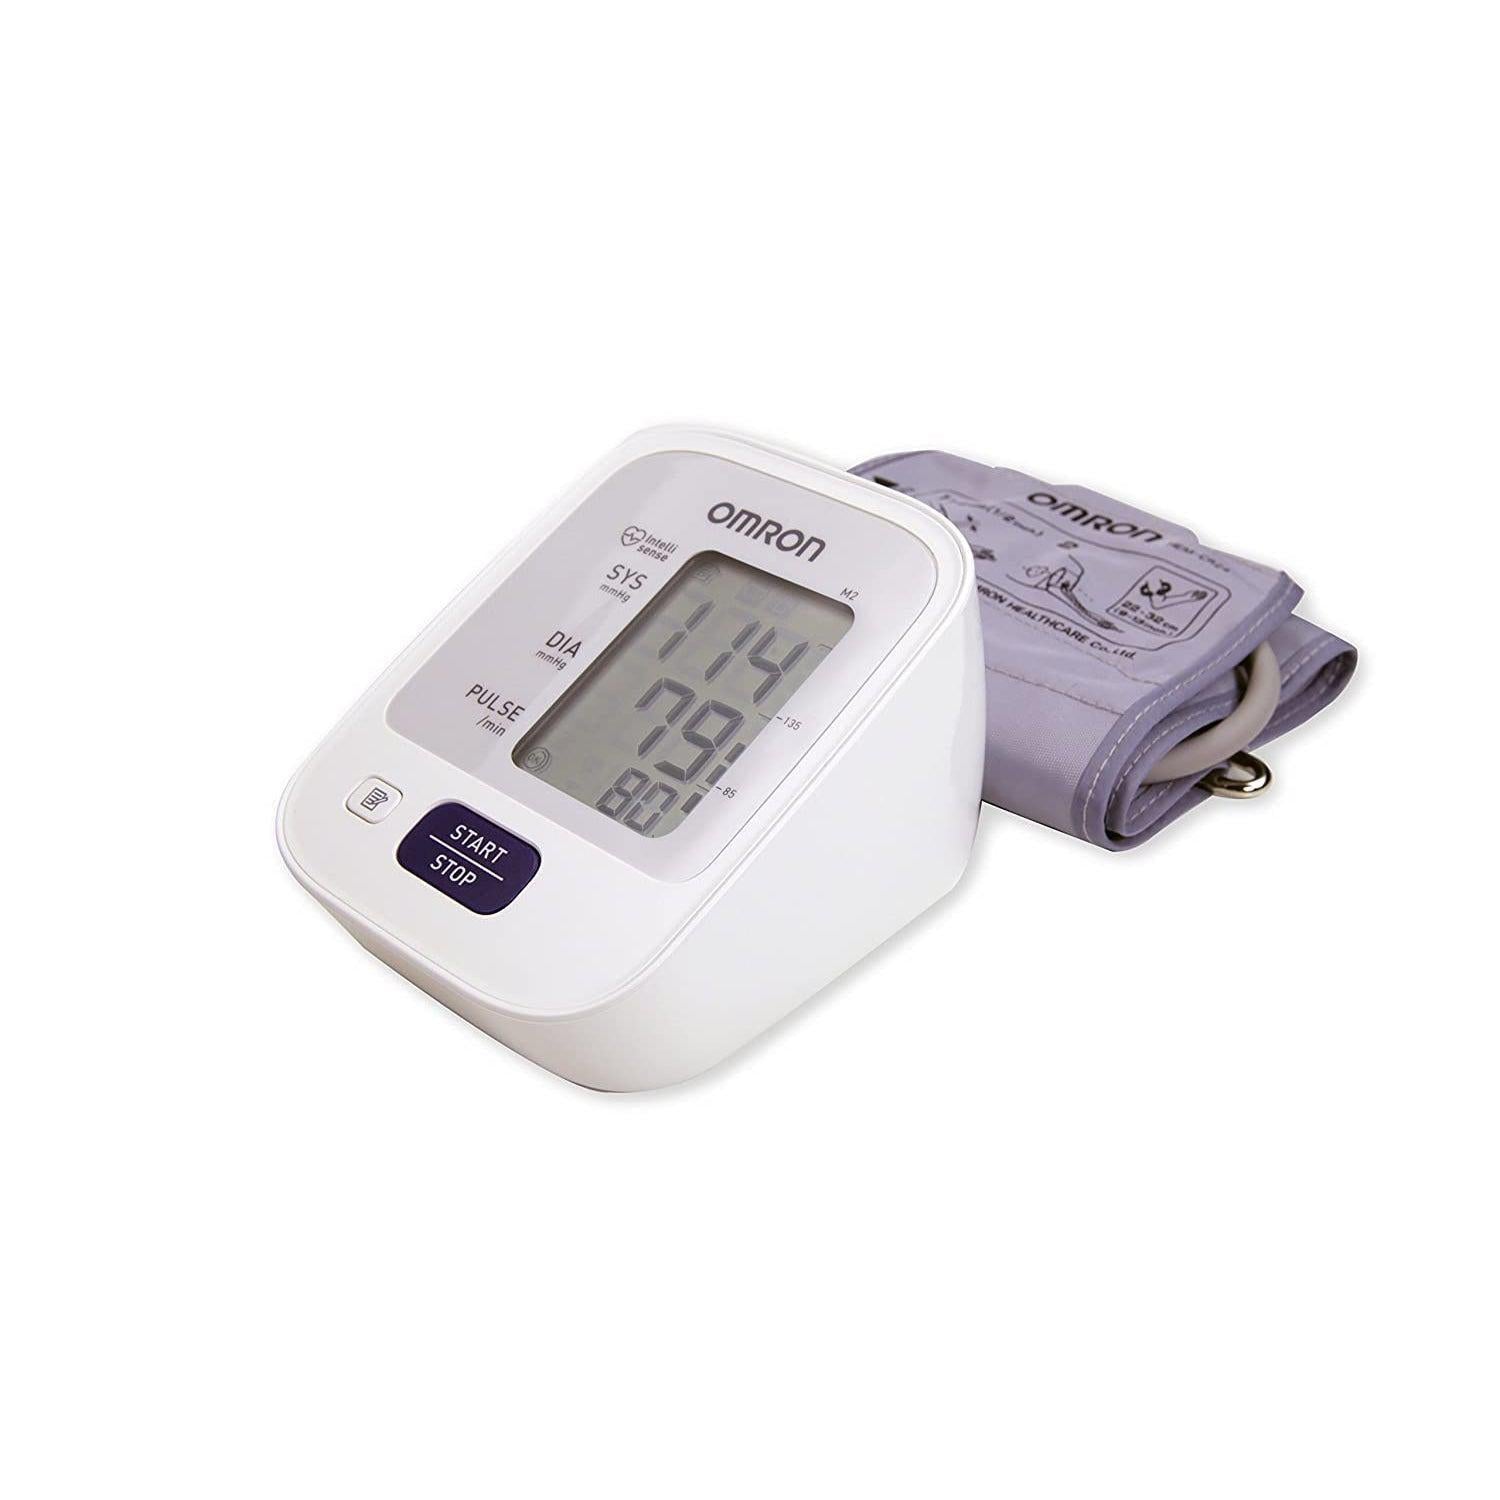 Omron M2 Classic Upper Arm Digital Blood Pressure Monitor - One Touch Operation - 22-32cm Cuff - Healthxpress.ie